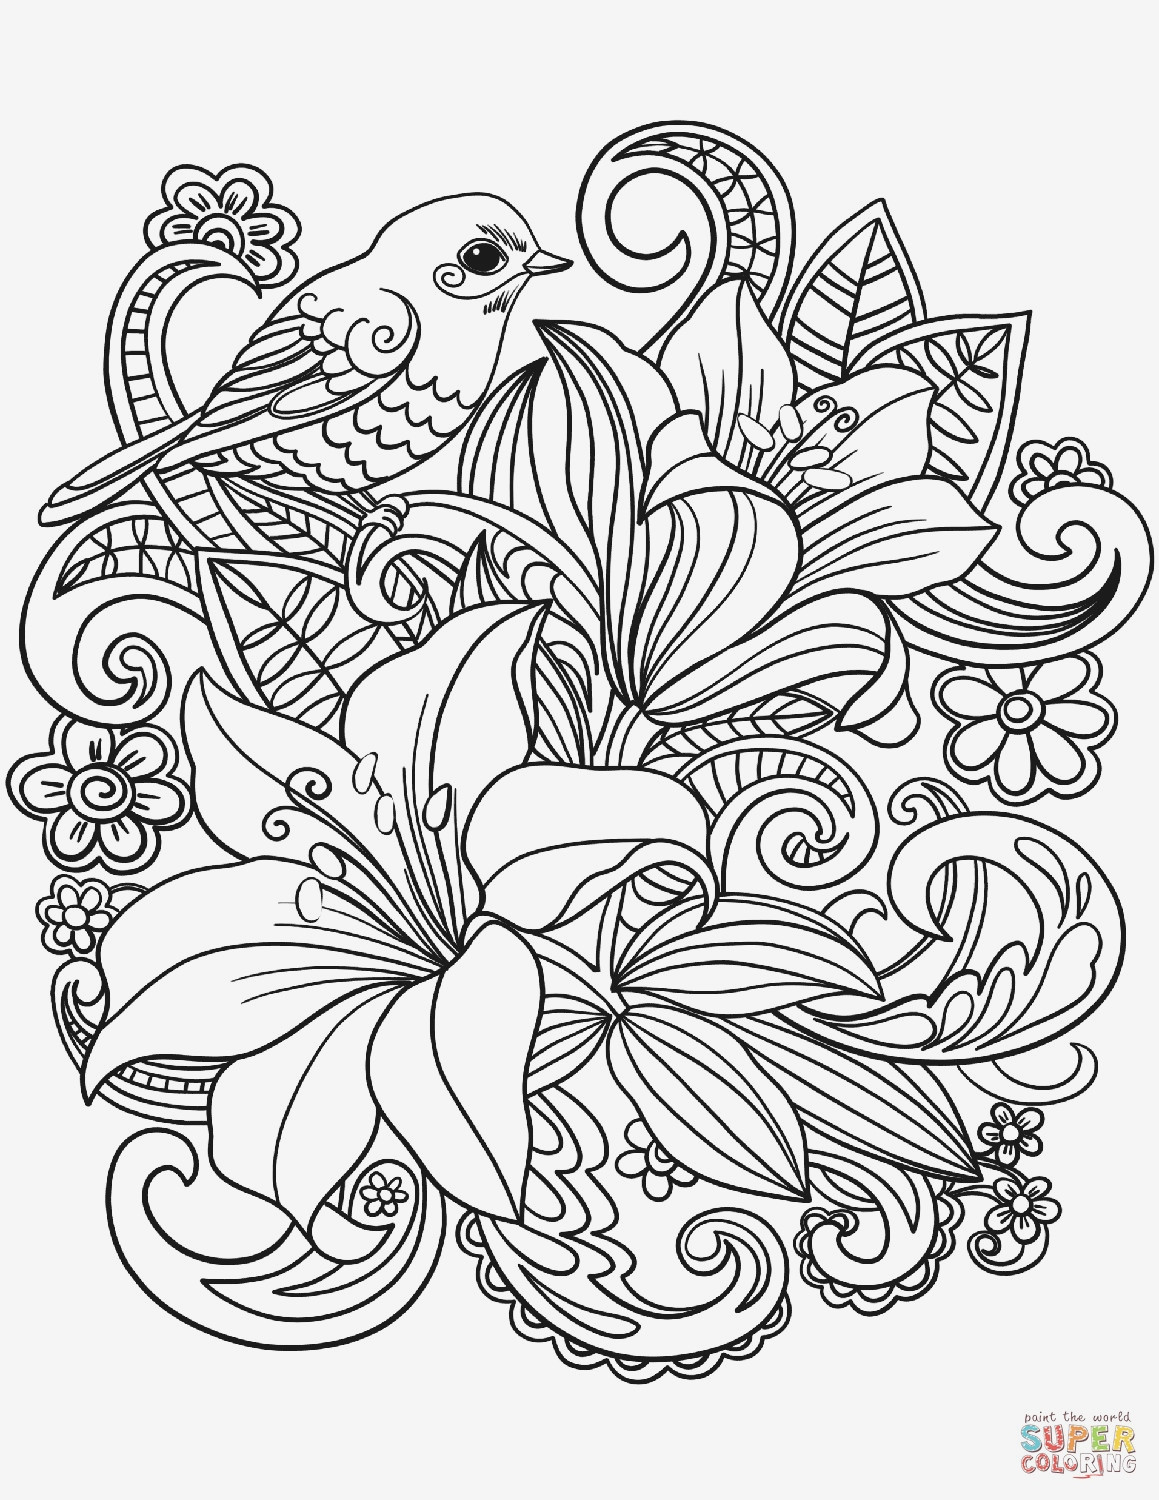 29 Unique Pictures Of Roses In A Vase 2024 free download pictures of roses in a vase of free flower coloring pages printable cool vases flower vase coloring with free flower coloring pages printable cool vases flower vase coloring page pages flowe